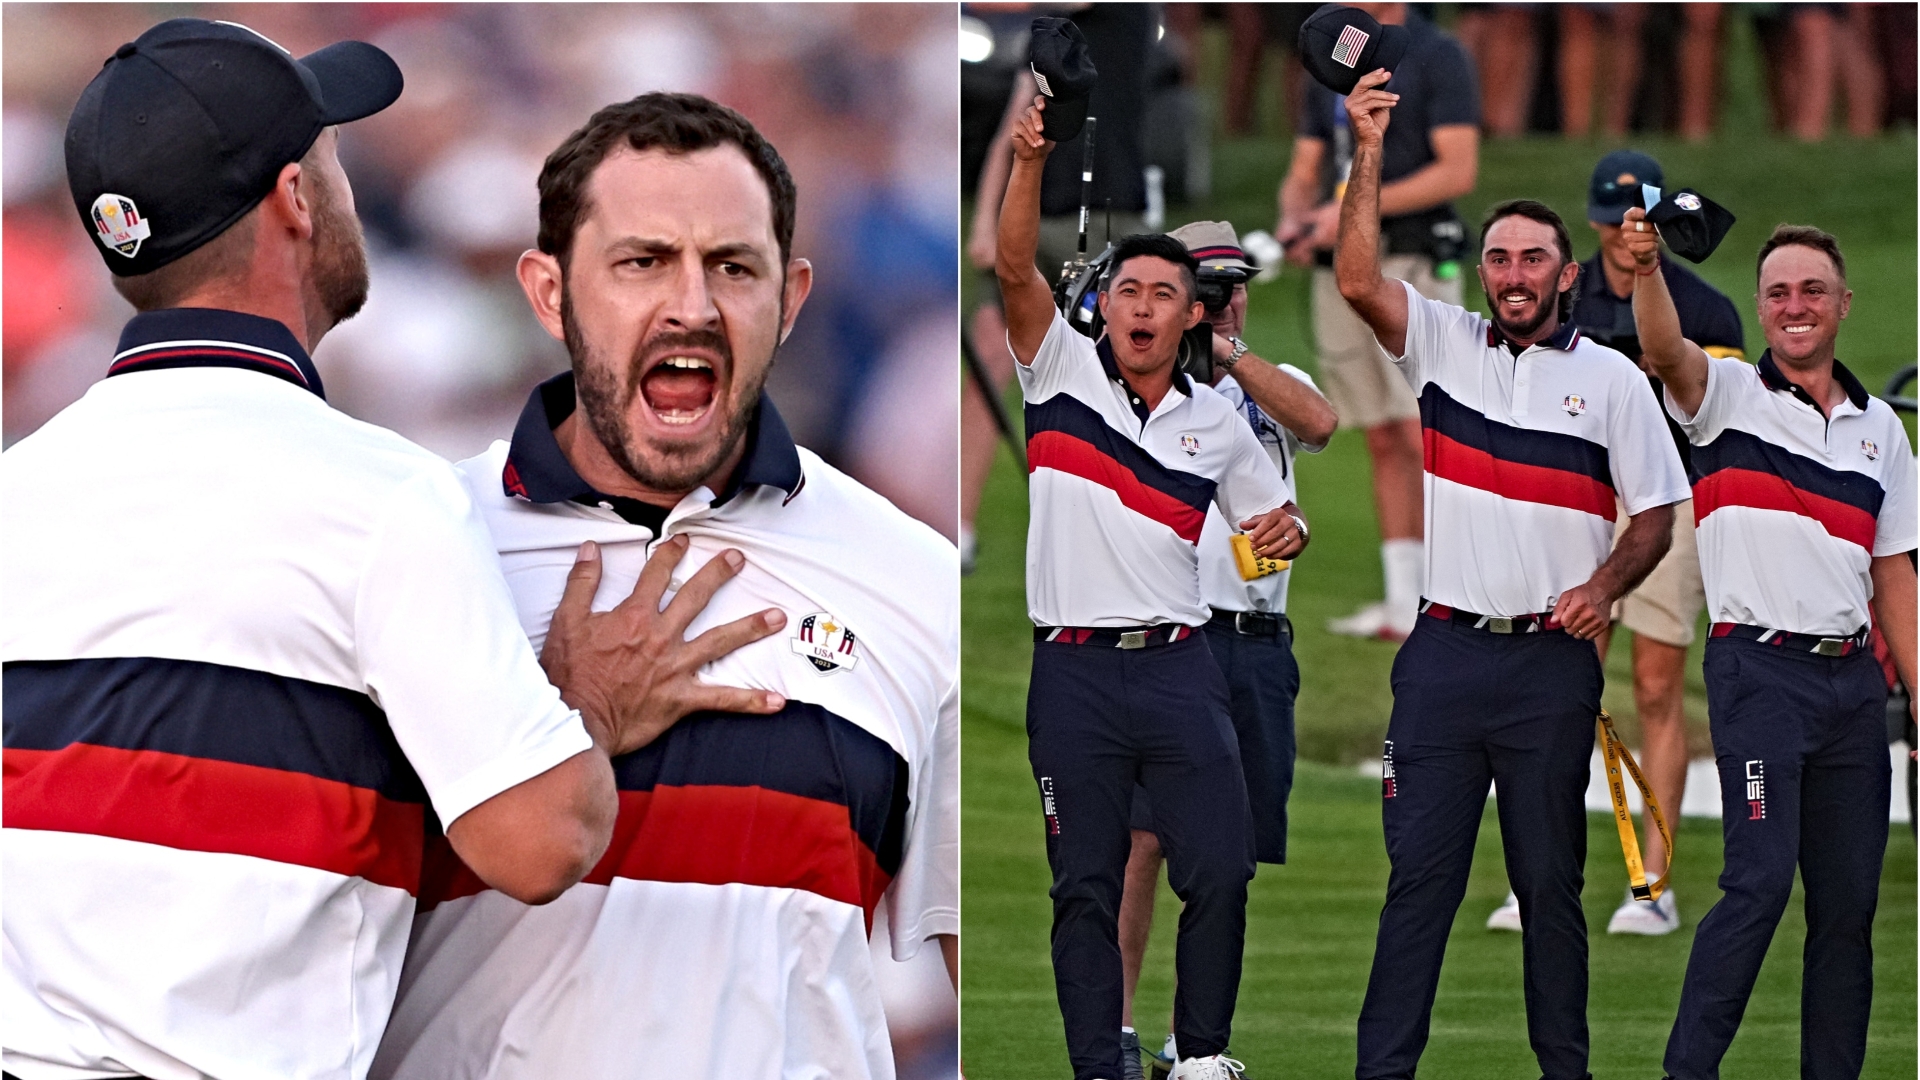 U.S. players wave caps after Cantlay drains putt to win match